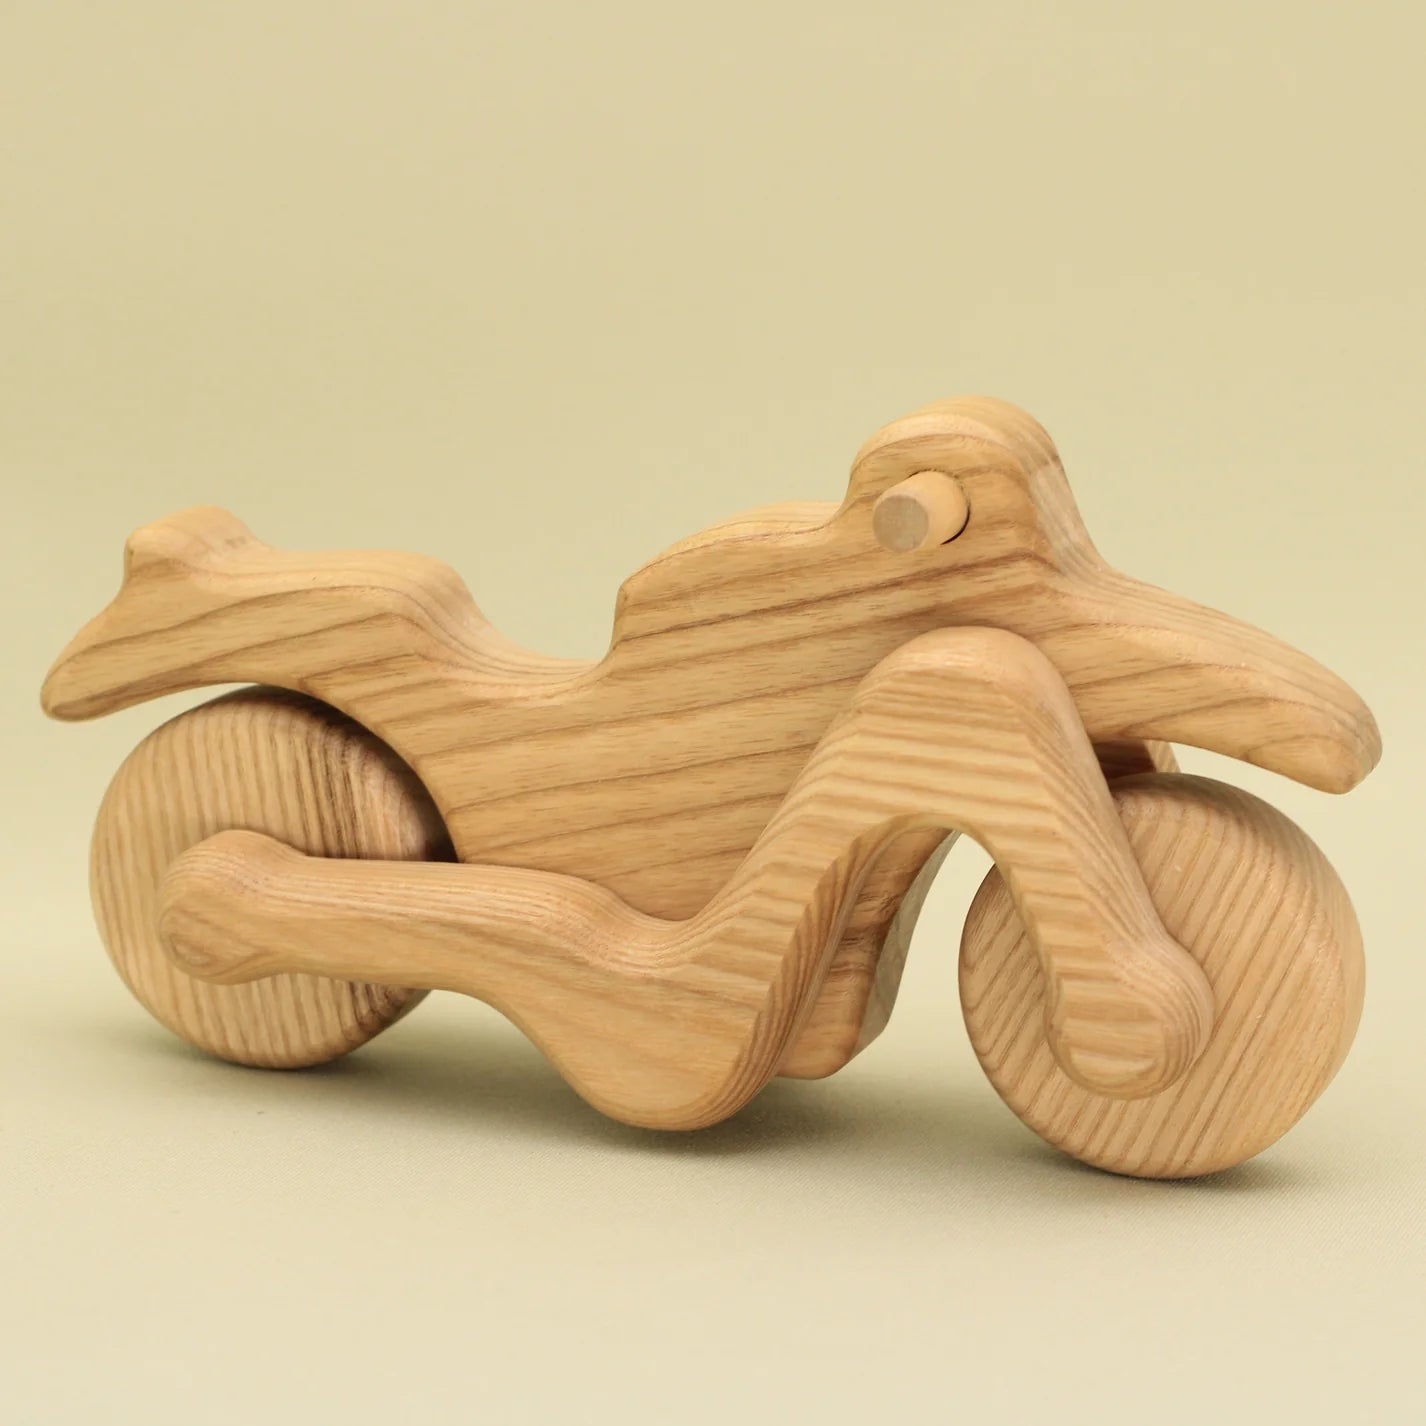 Wooden Motorcycle Motorbike Toy for Kids